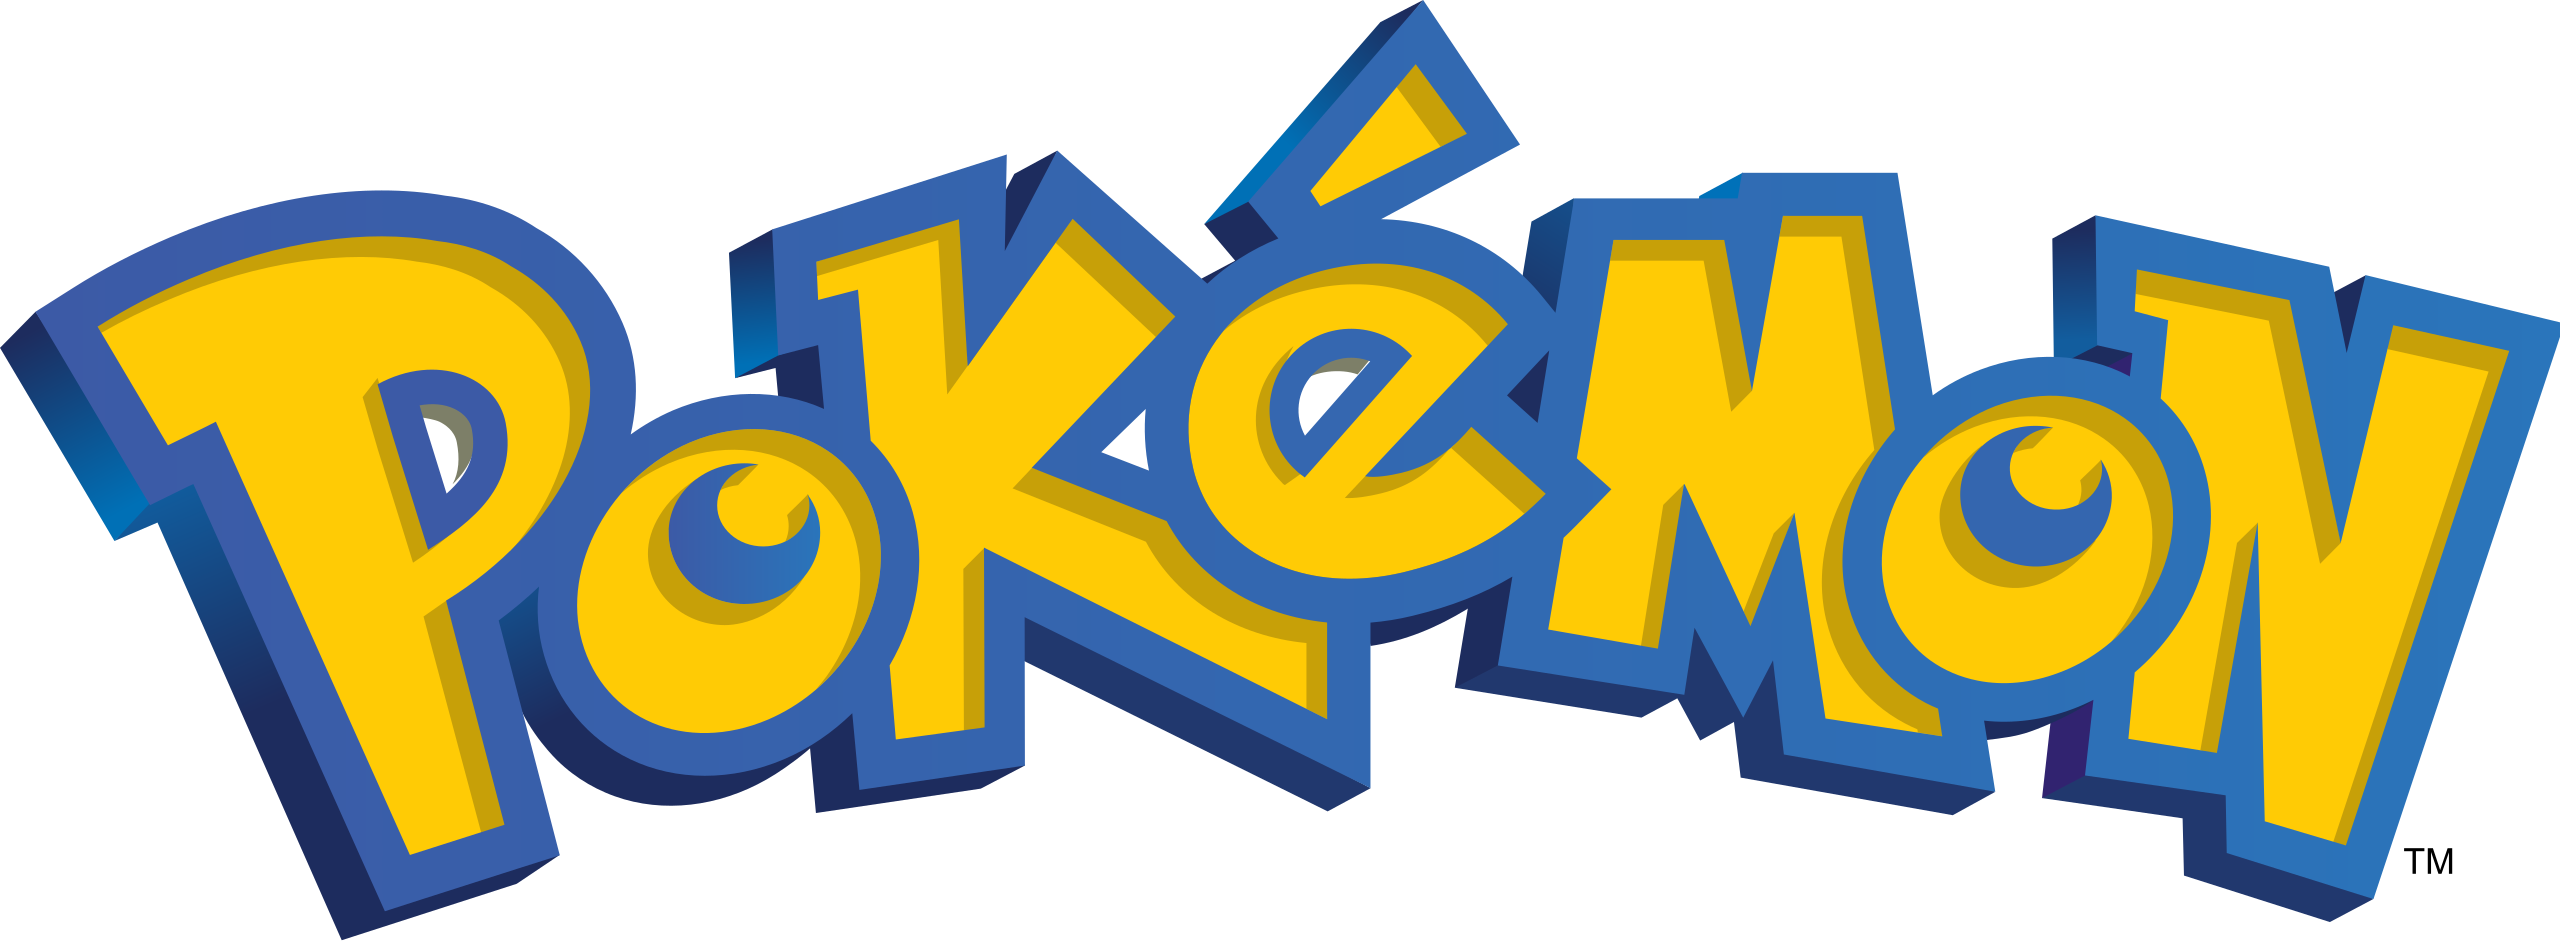 Three tips on how to find the language of a Pokemon Card